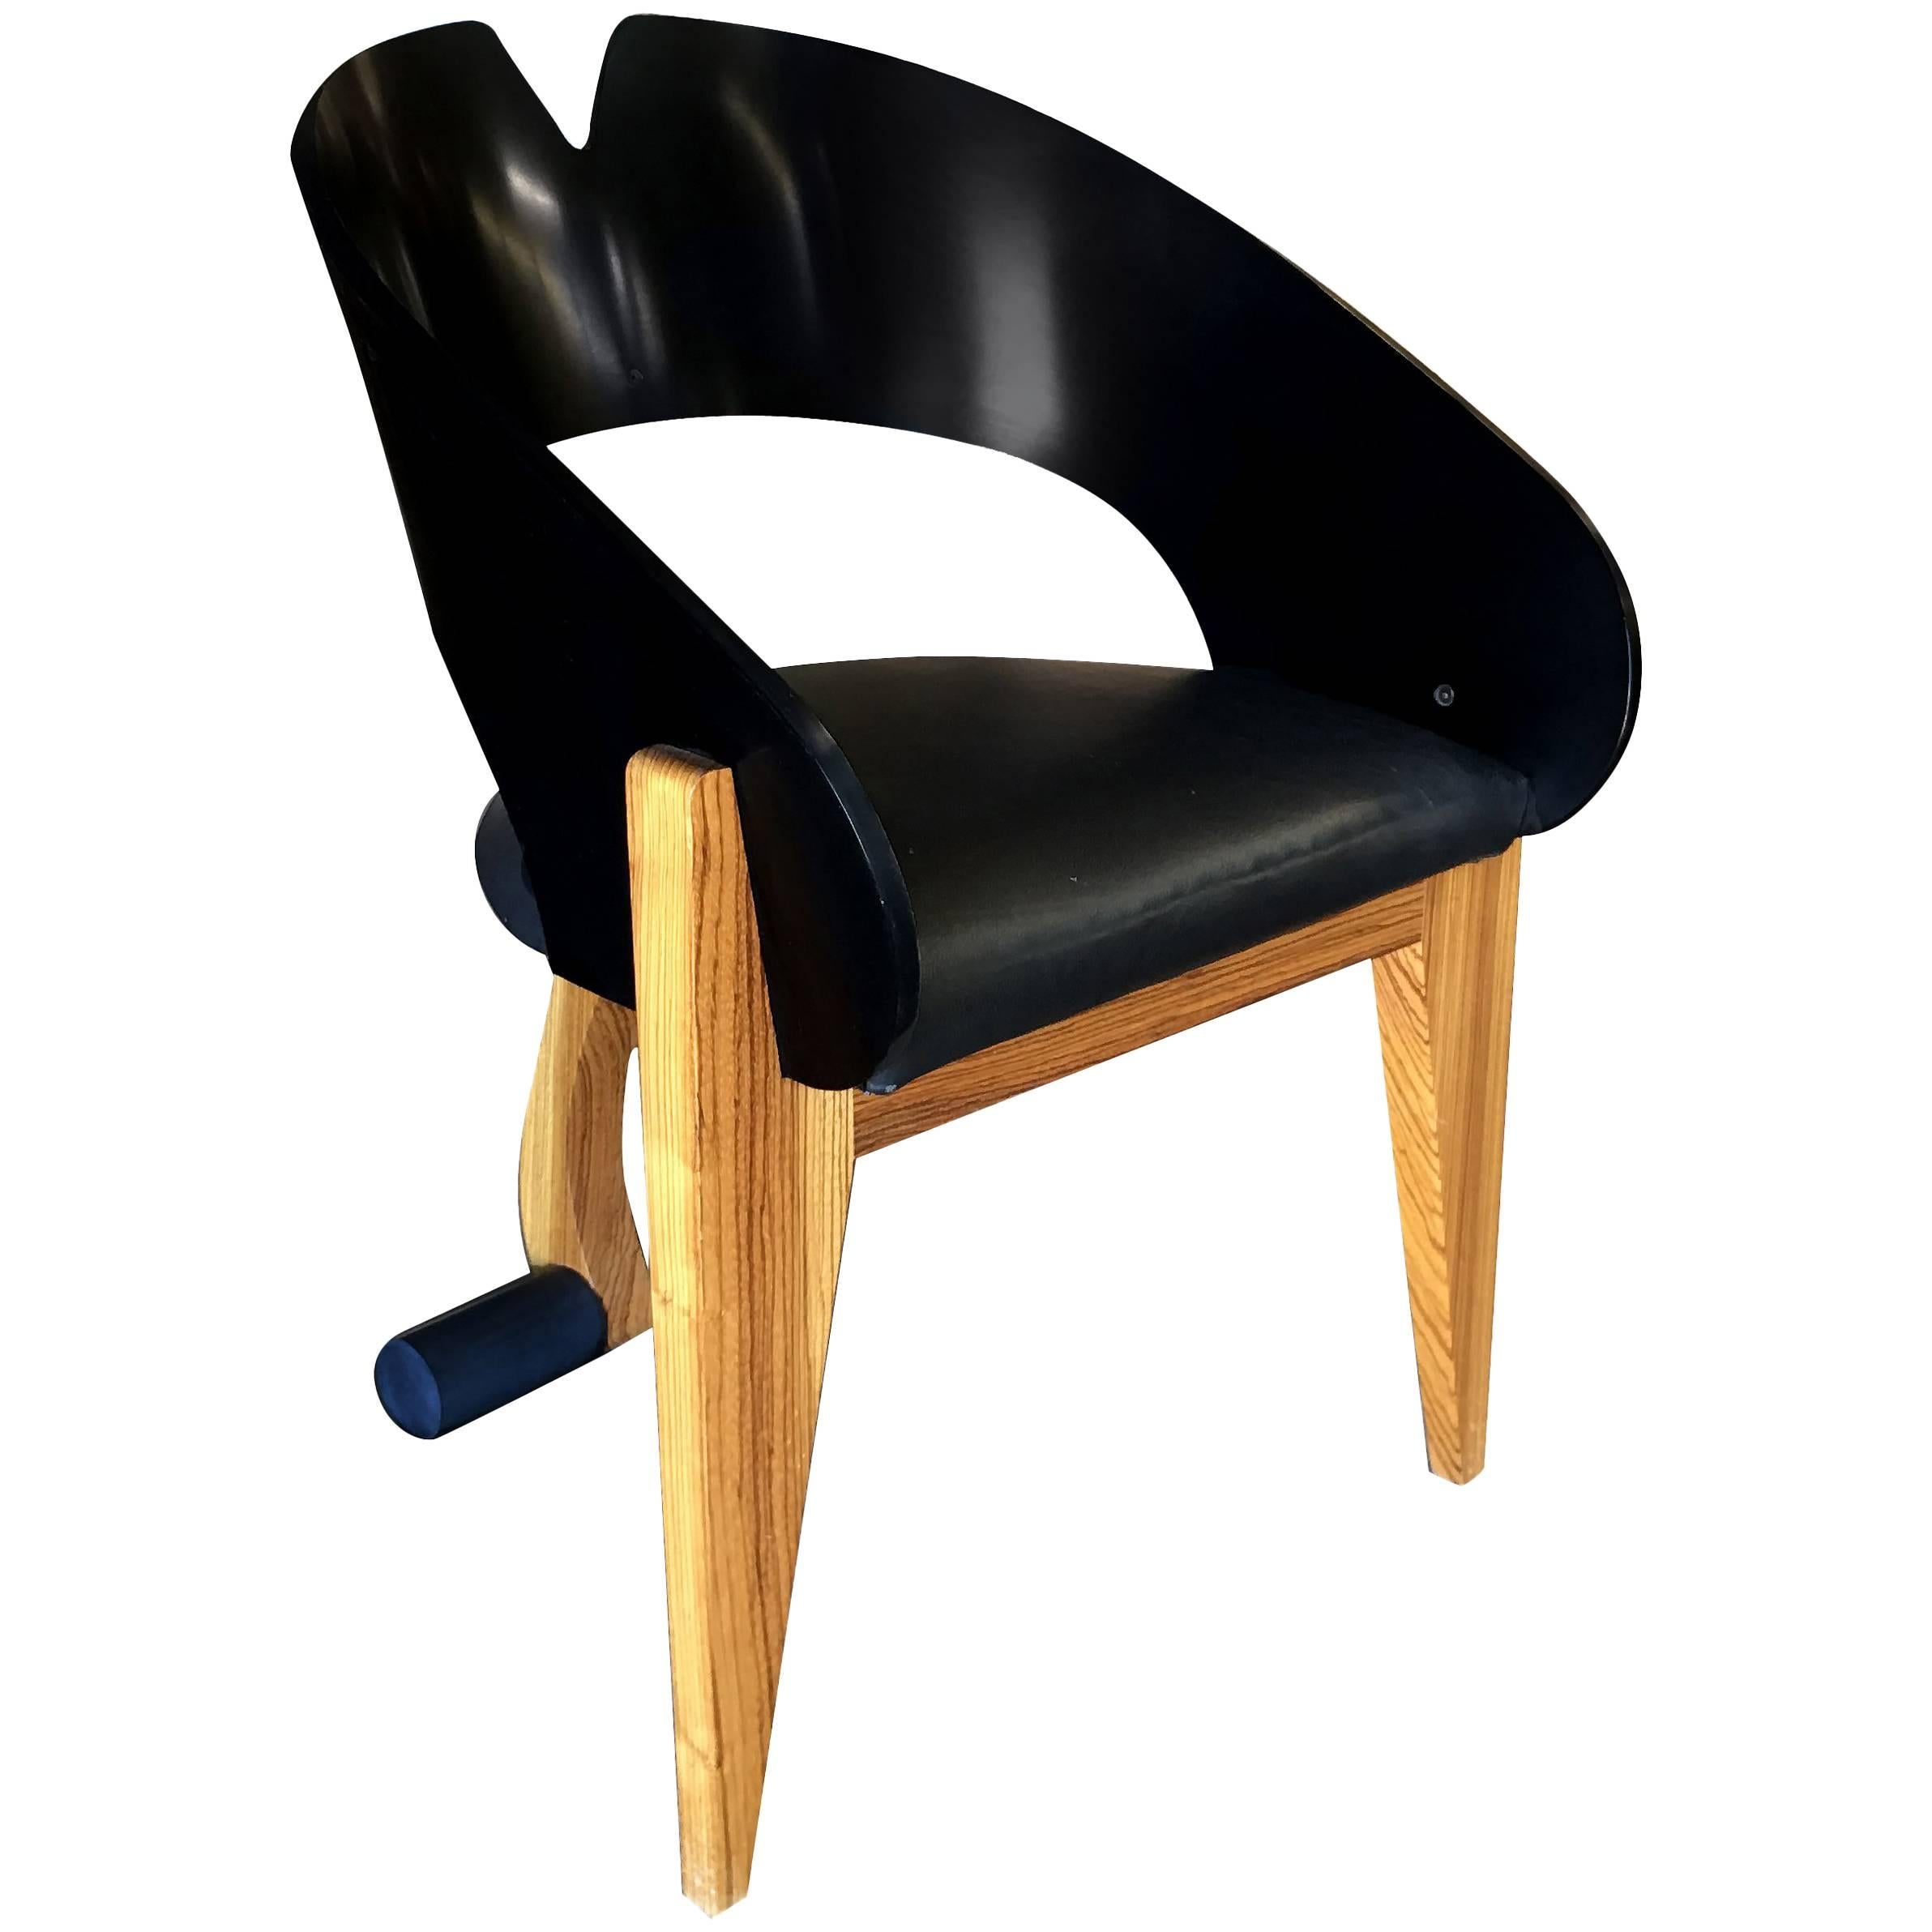 Modernist Chair from the Gallery of Functional Art, circa 1994